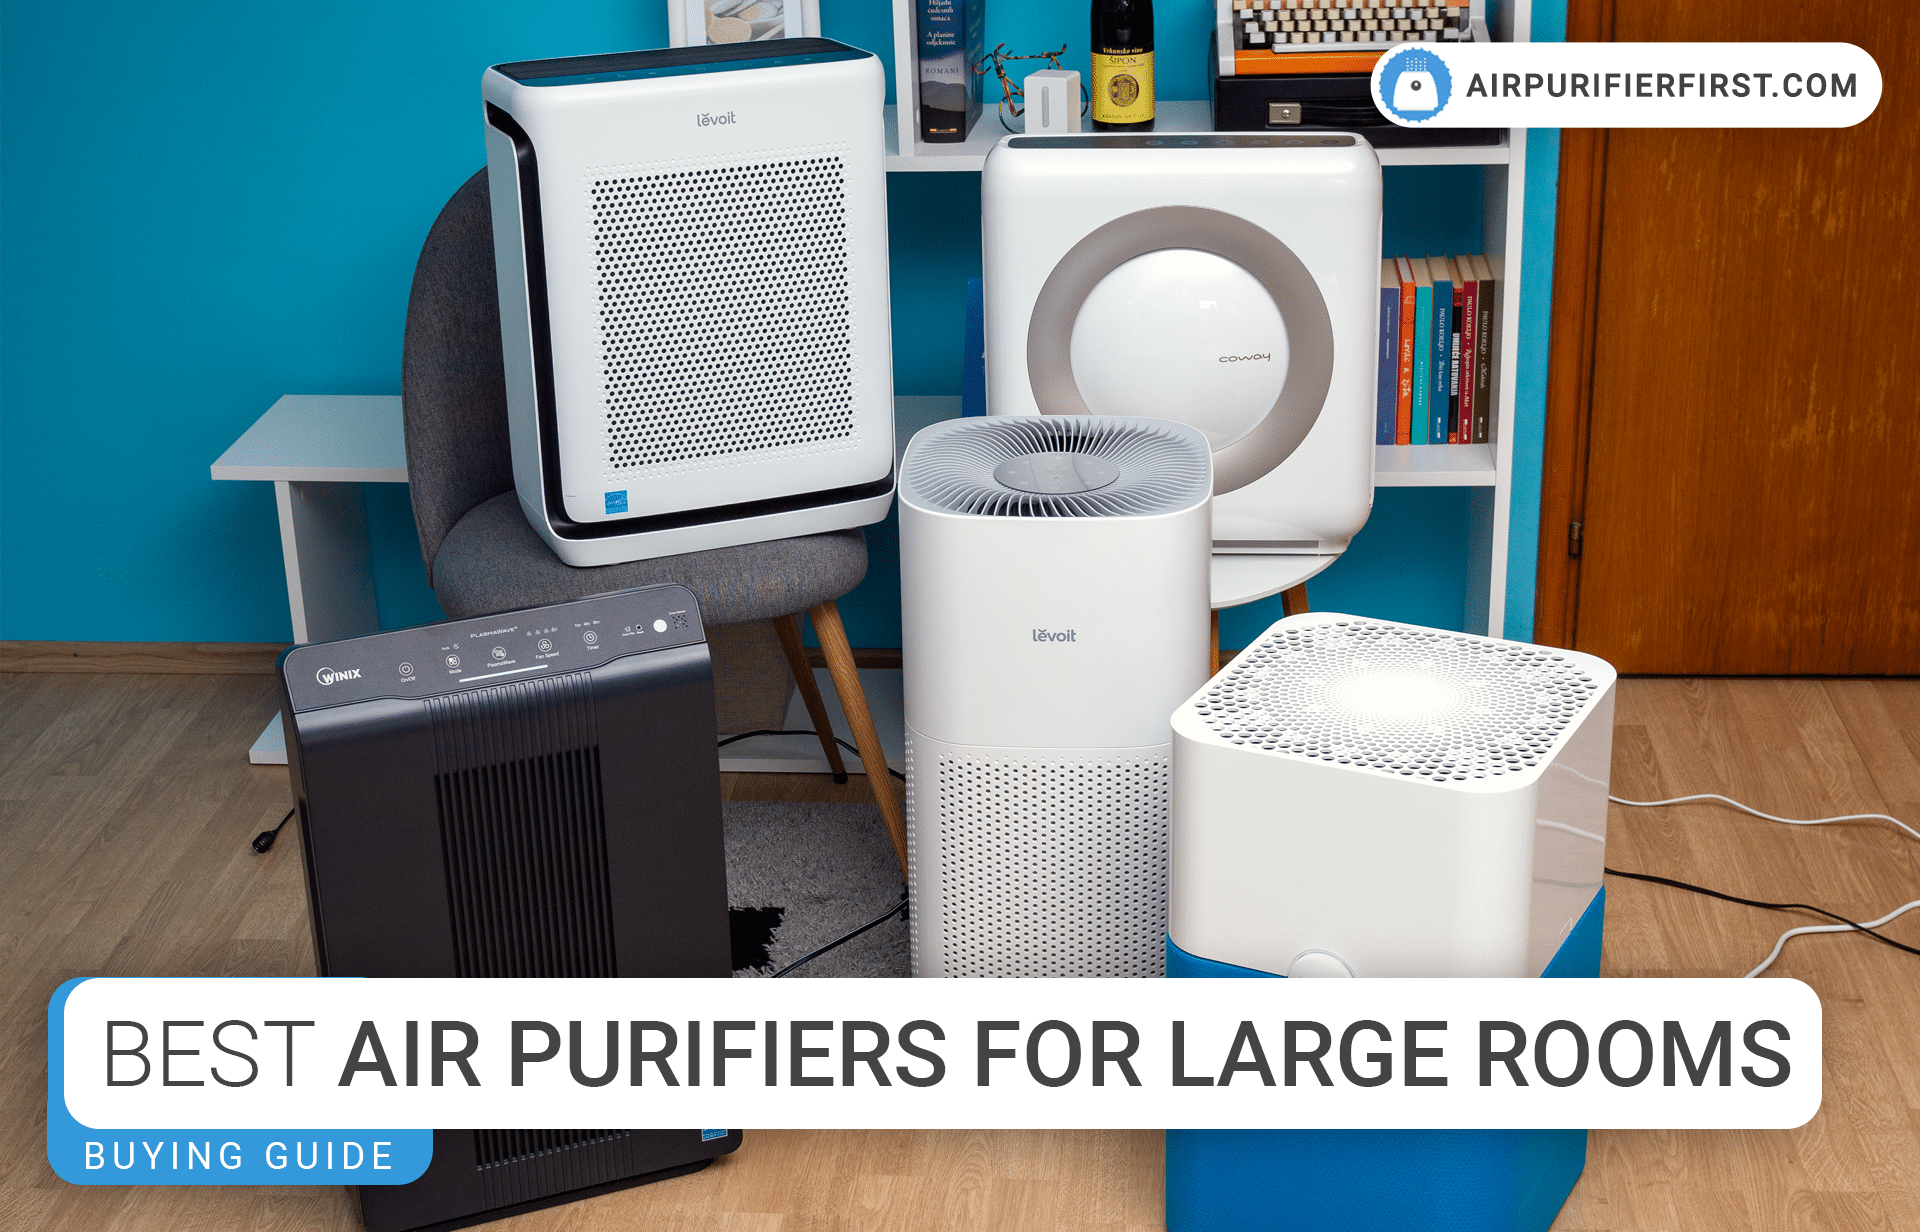 Best Air Purifiers For Large Rooms - Guide